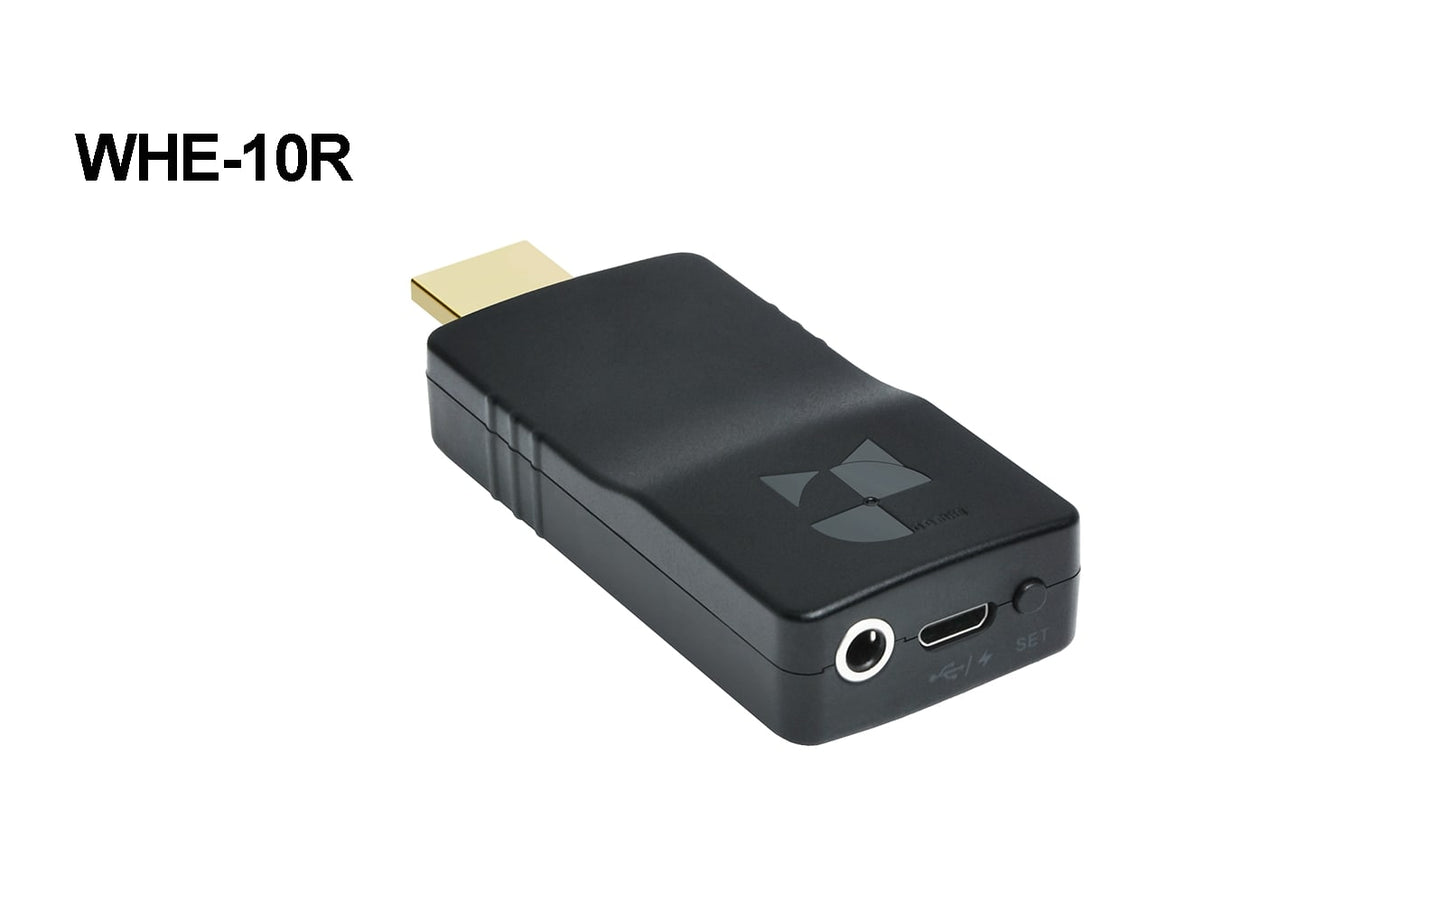 DDMALL WHE-10RX Portable Wireless HDMI Receiver, HDMI Wireless Video Extender Receiver, Support HD Video Transmission in Low Latency, Support APP Control